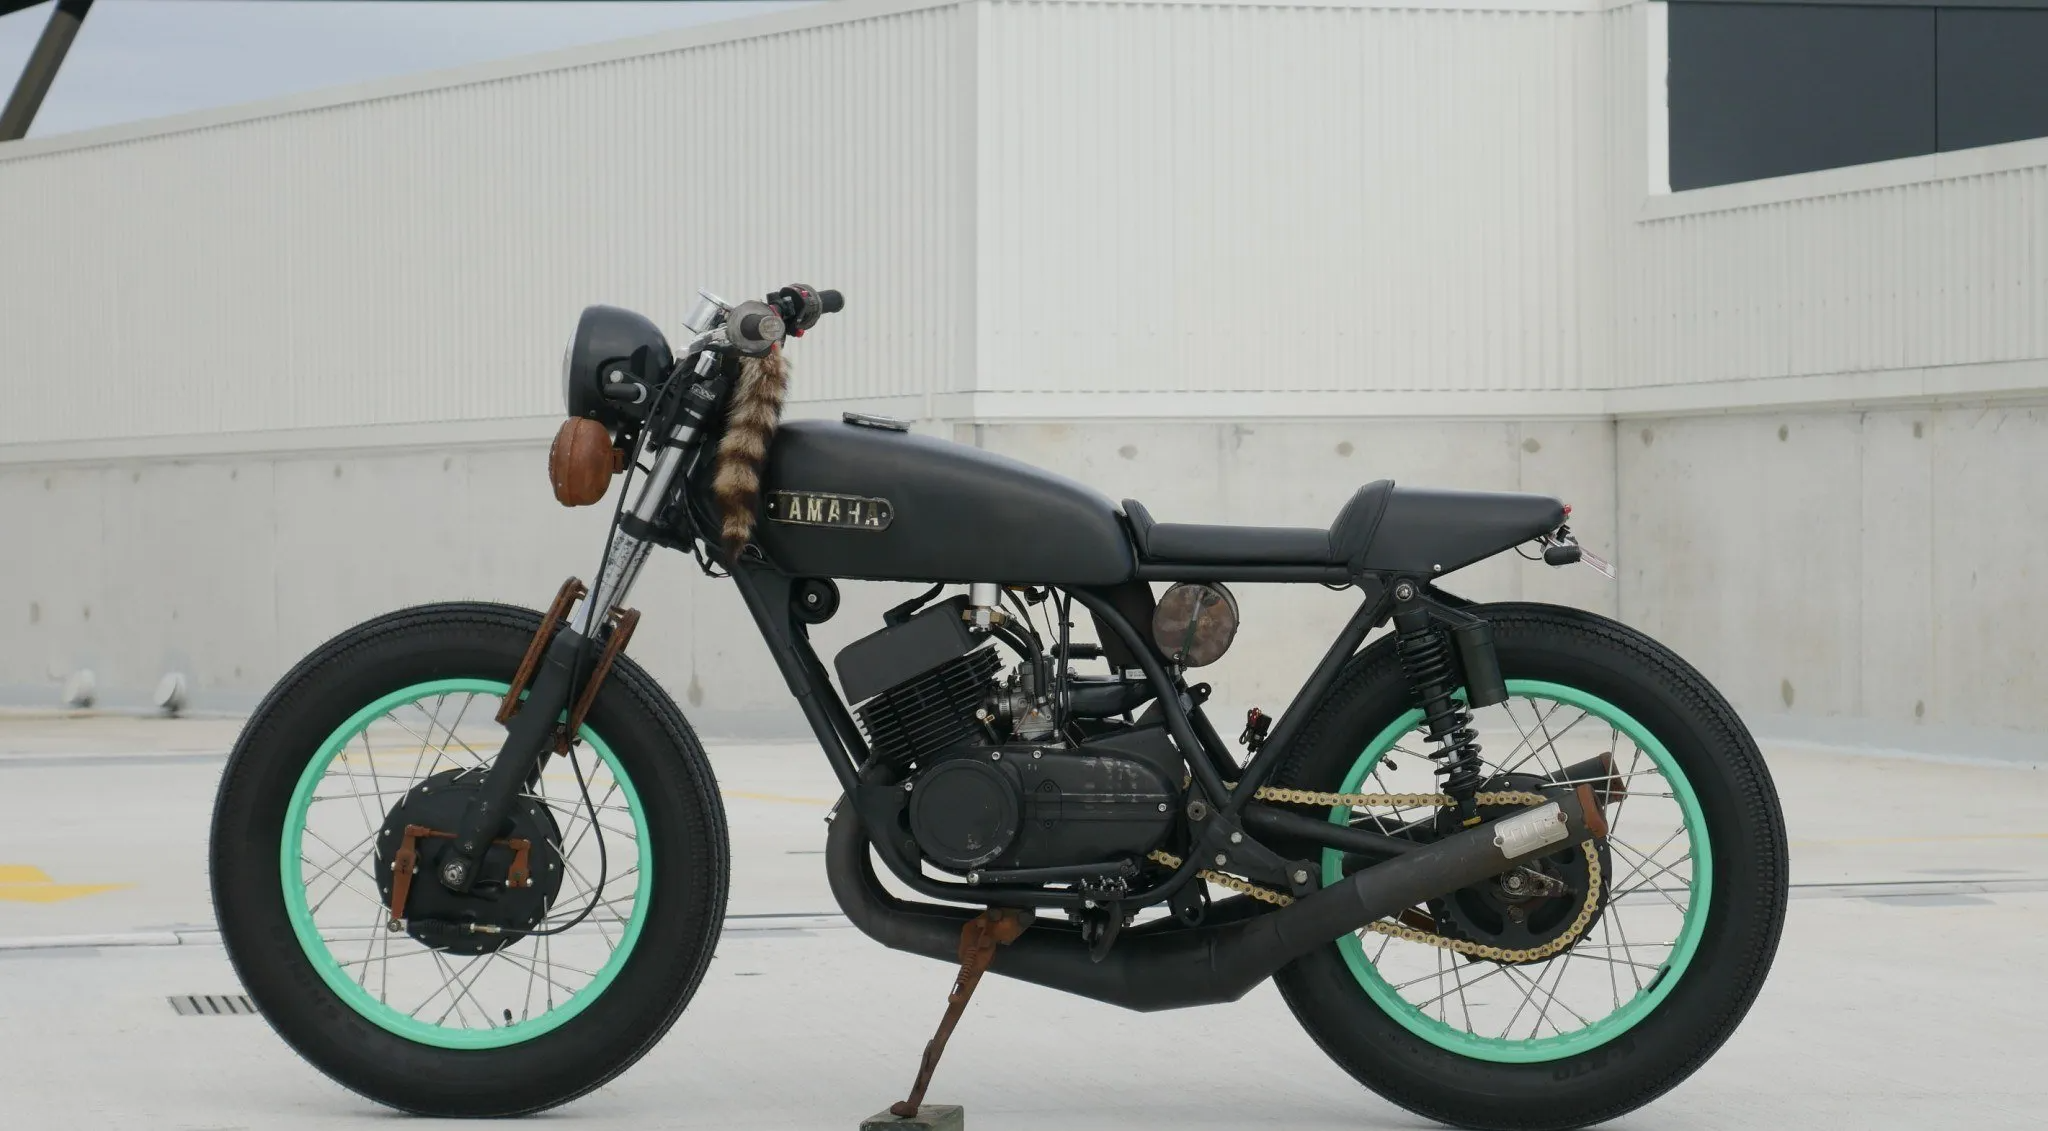 Locky’s Yamaha R5 RD350 Cafe Racer- Bringing this 2 stroke Vintage race bike back to life